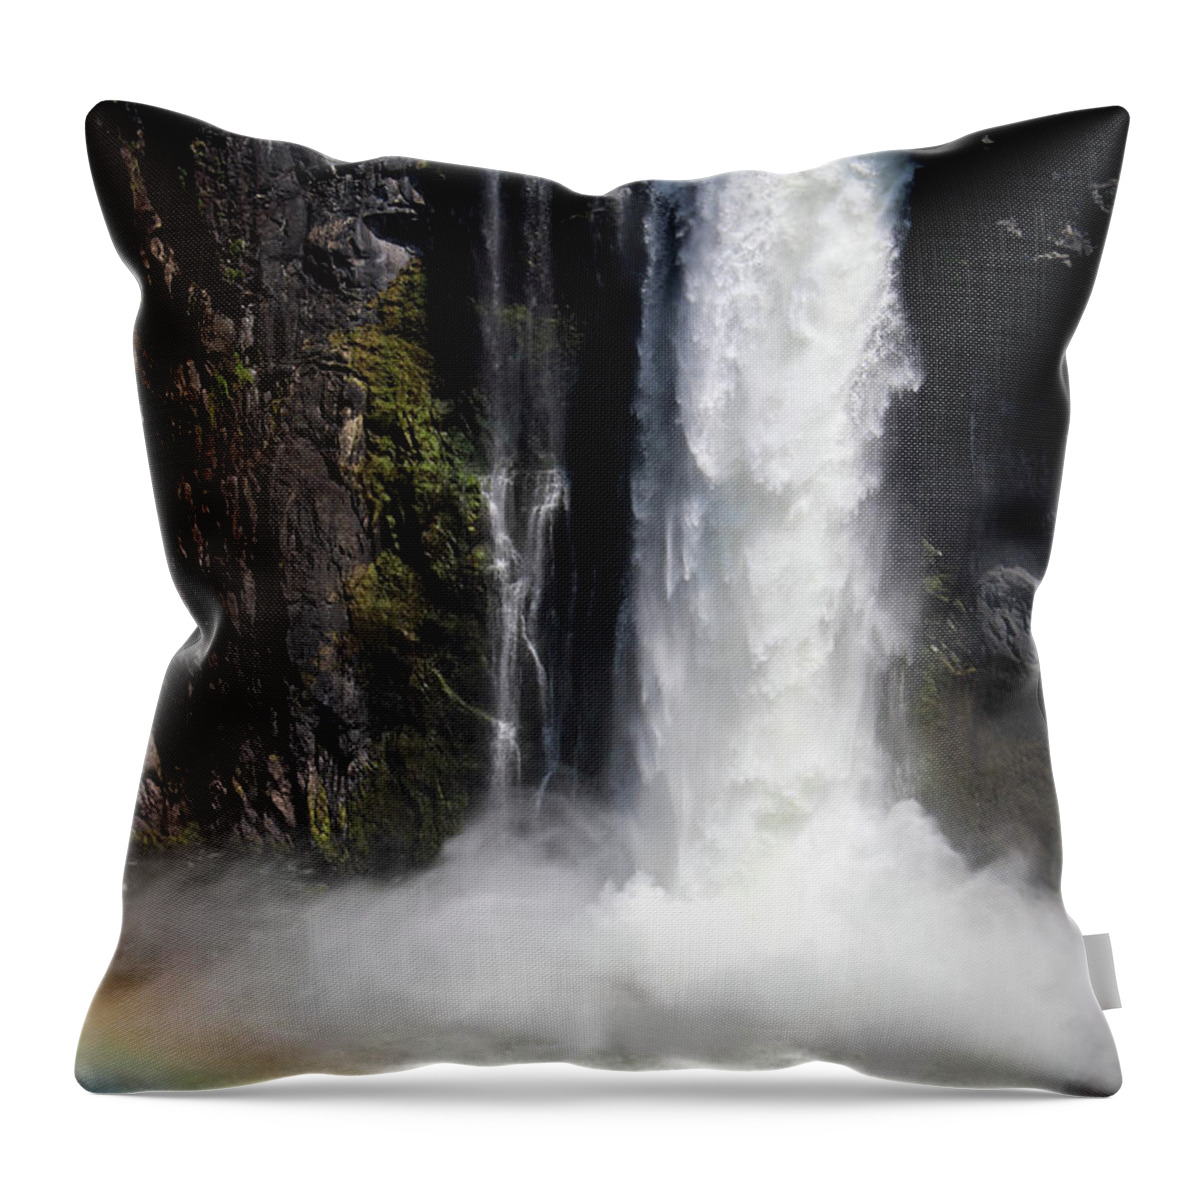  Throw Pillow featuring the photograph Waterfall by Eric Pengelly